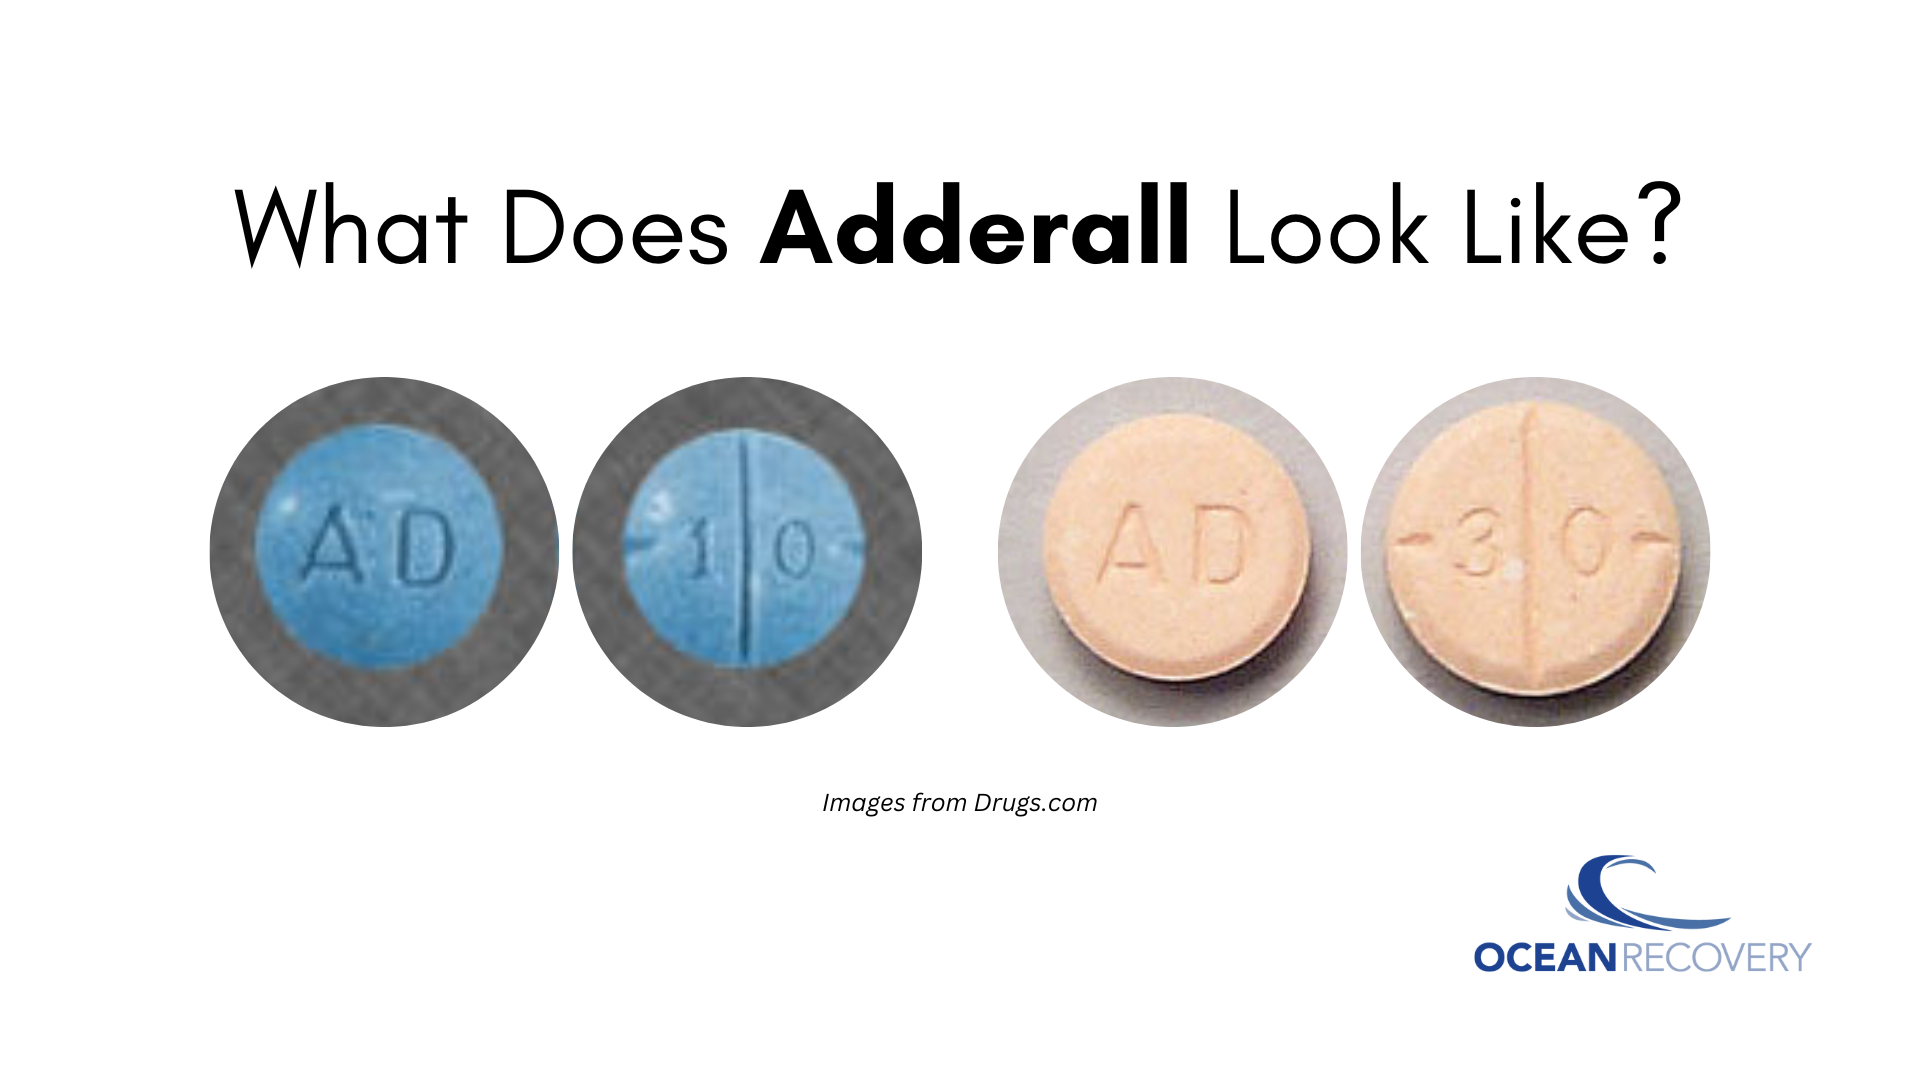 What Does Adderall Look Like